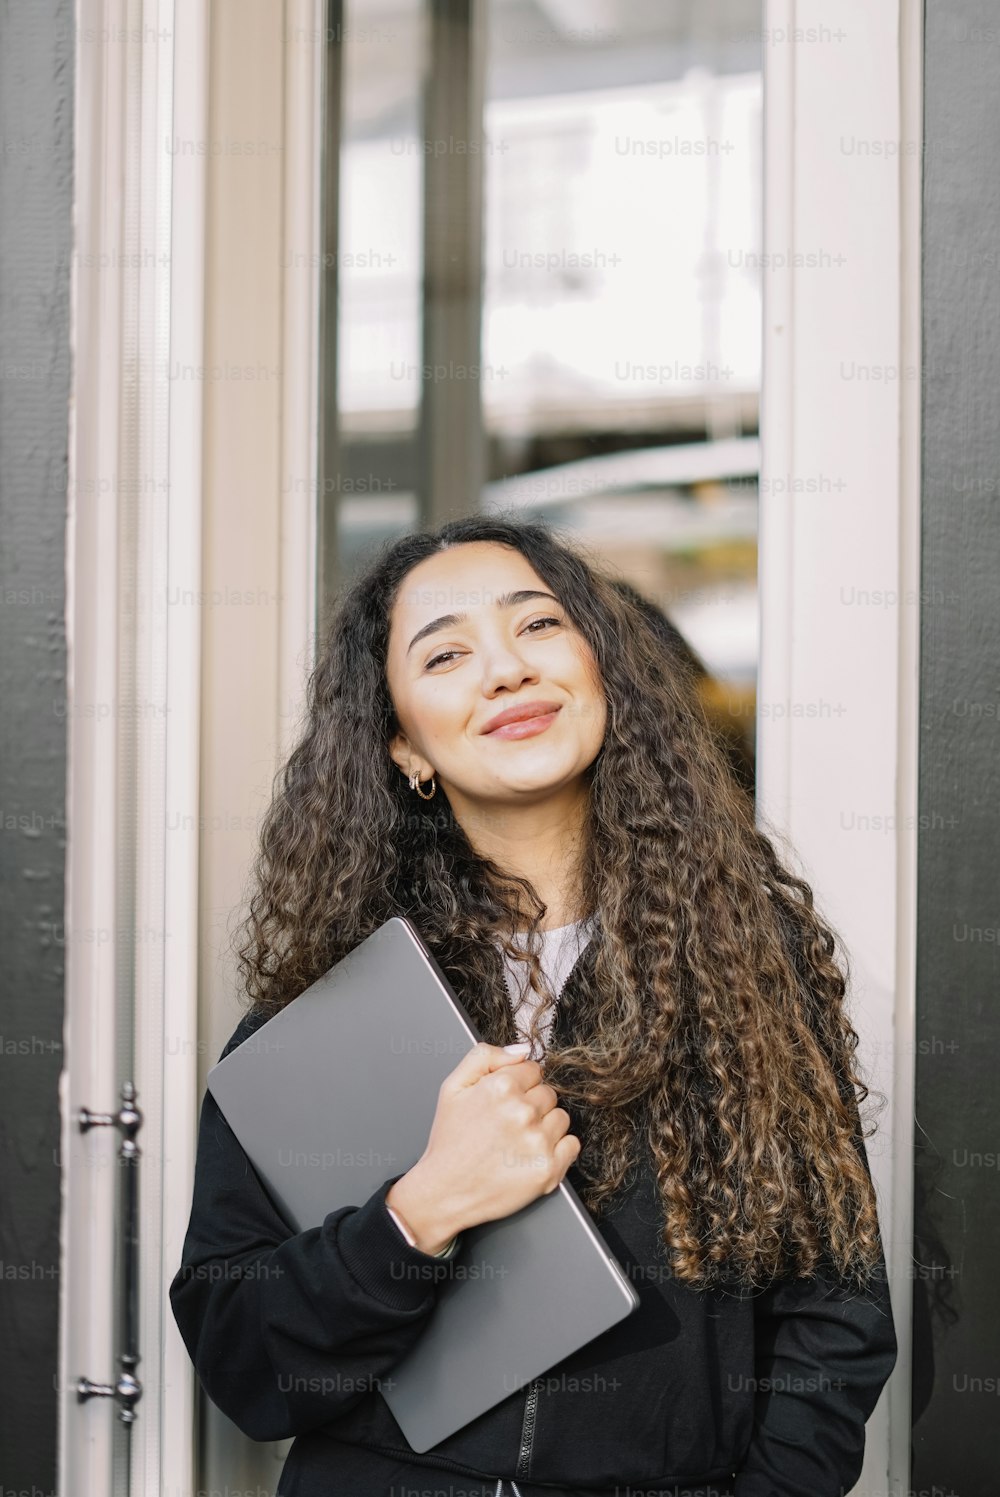 a woman with curly hair holding a folder